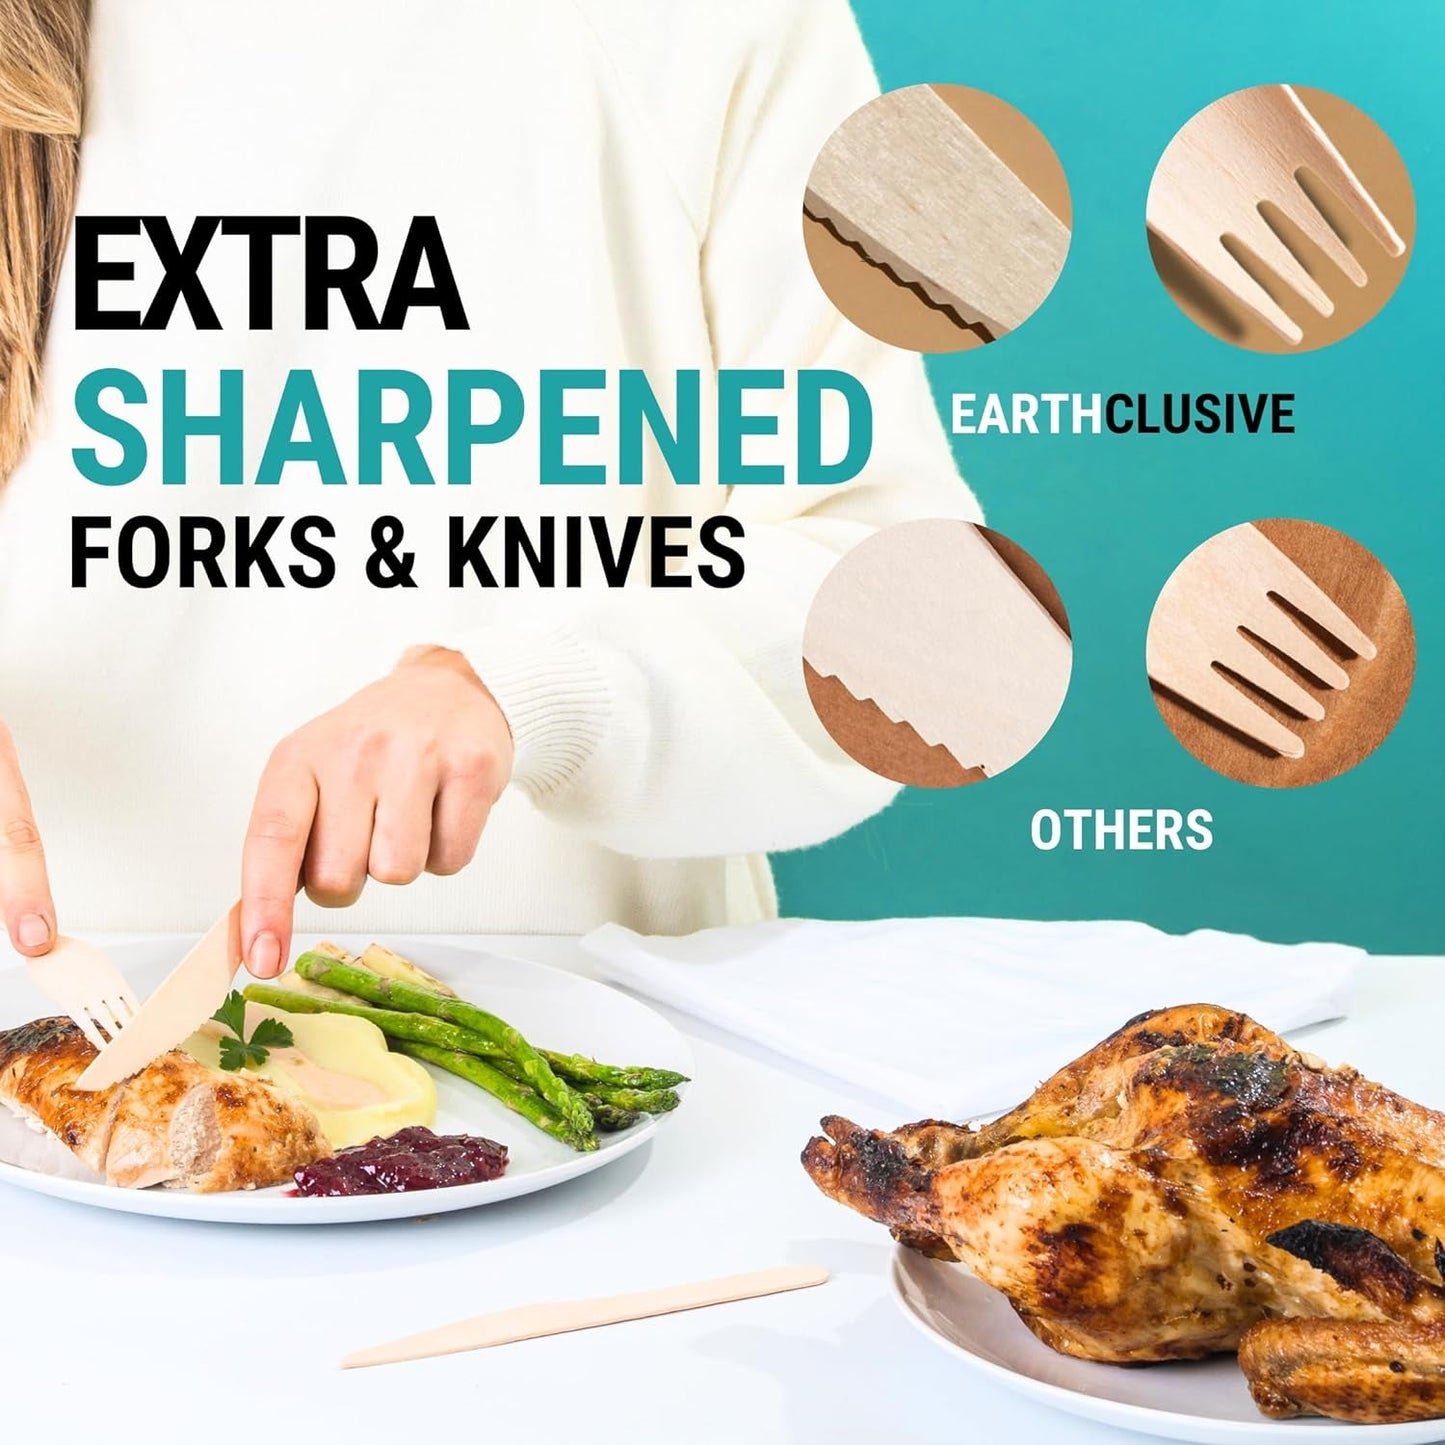 100% Compostable Wooden Cutlery Set - 300 Pieces (150 Forks | 100 Spoons | 50 Knives) Disposable Utensils for Party, Camping, & More - Biodegradable Packaged Silverware, Flatware Sets  EarthClusive   